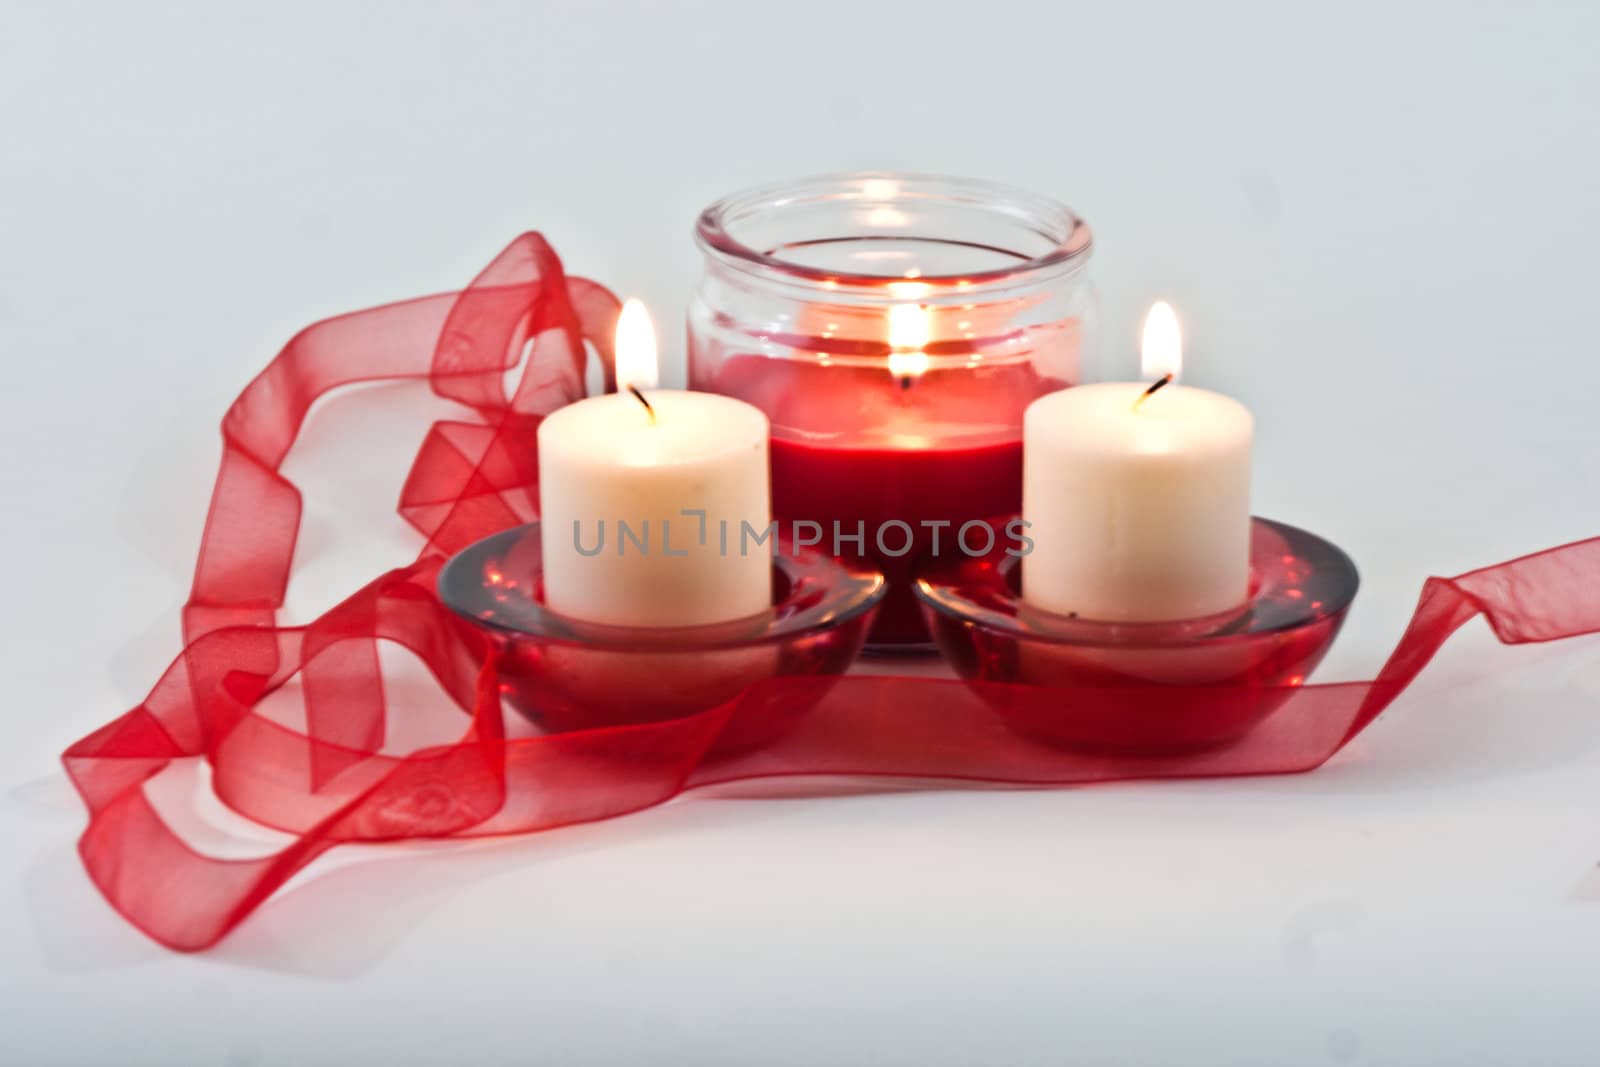 Candle Collection by rothphotosc